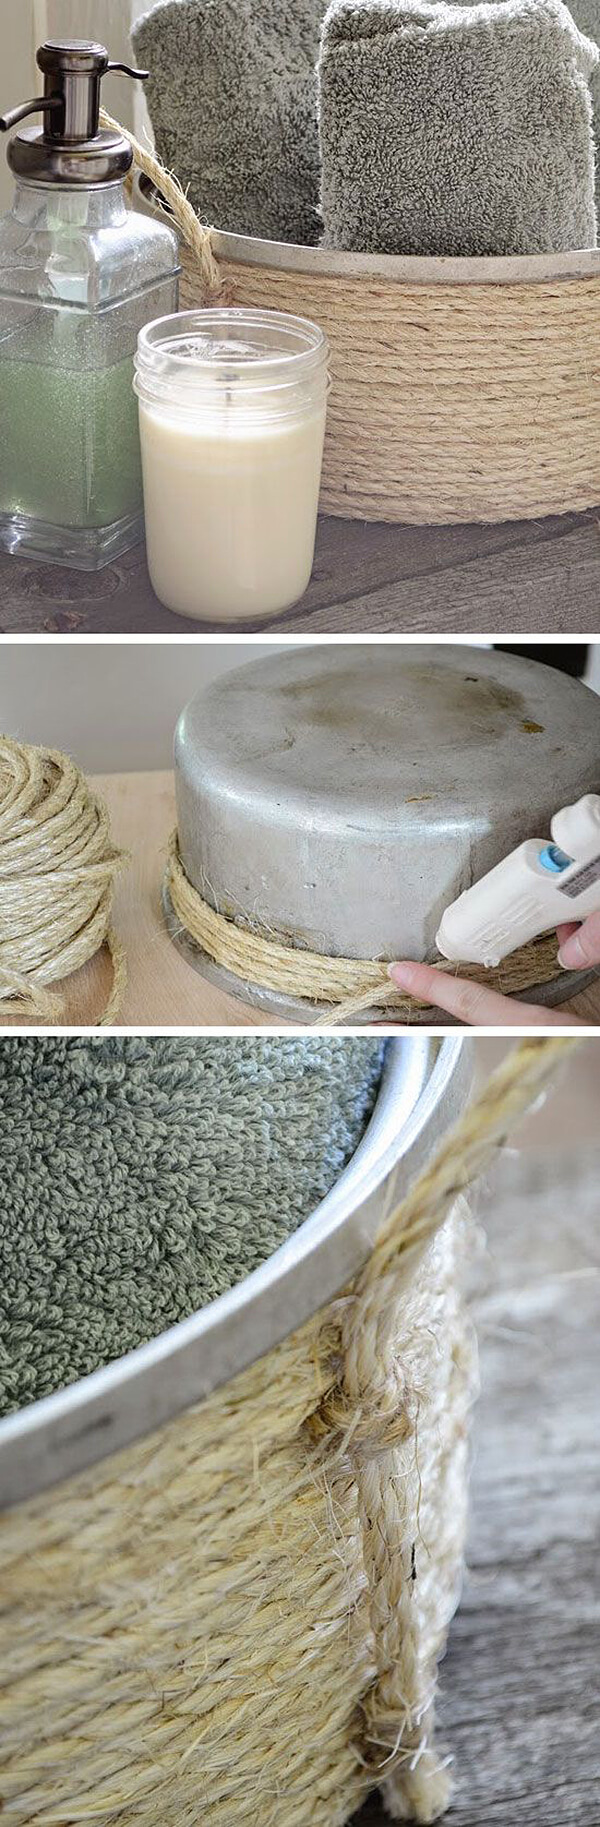 Rustic Storage Projects, Convert An Old Pot Into A Twine Basket